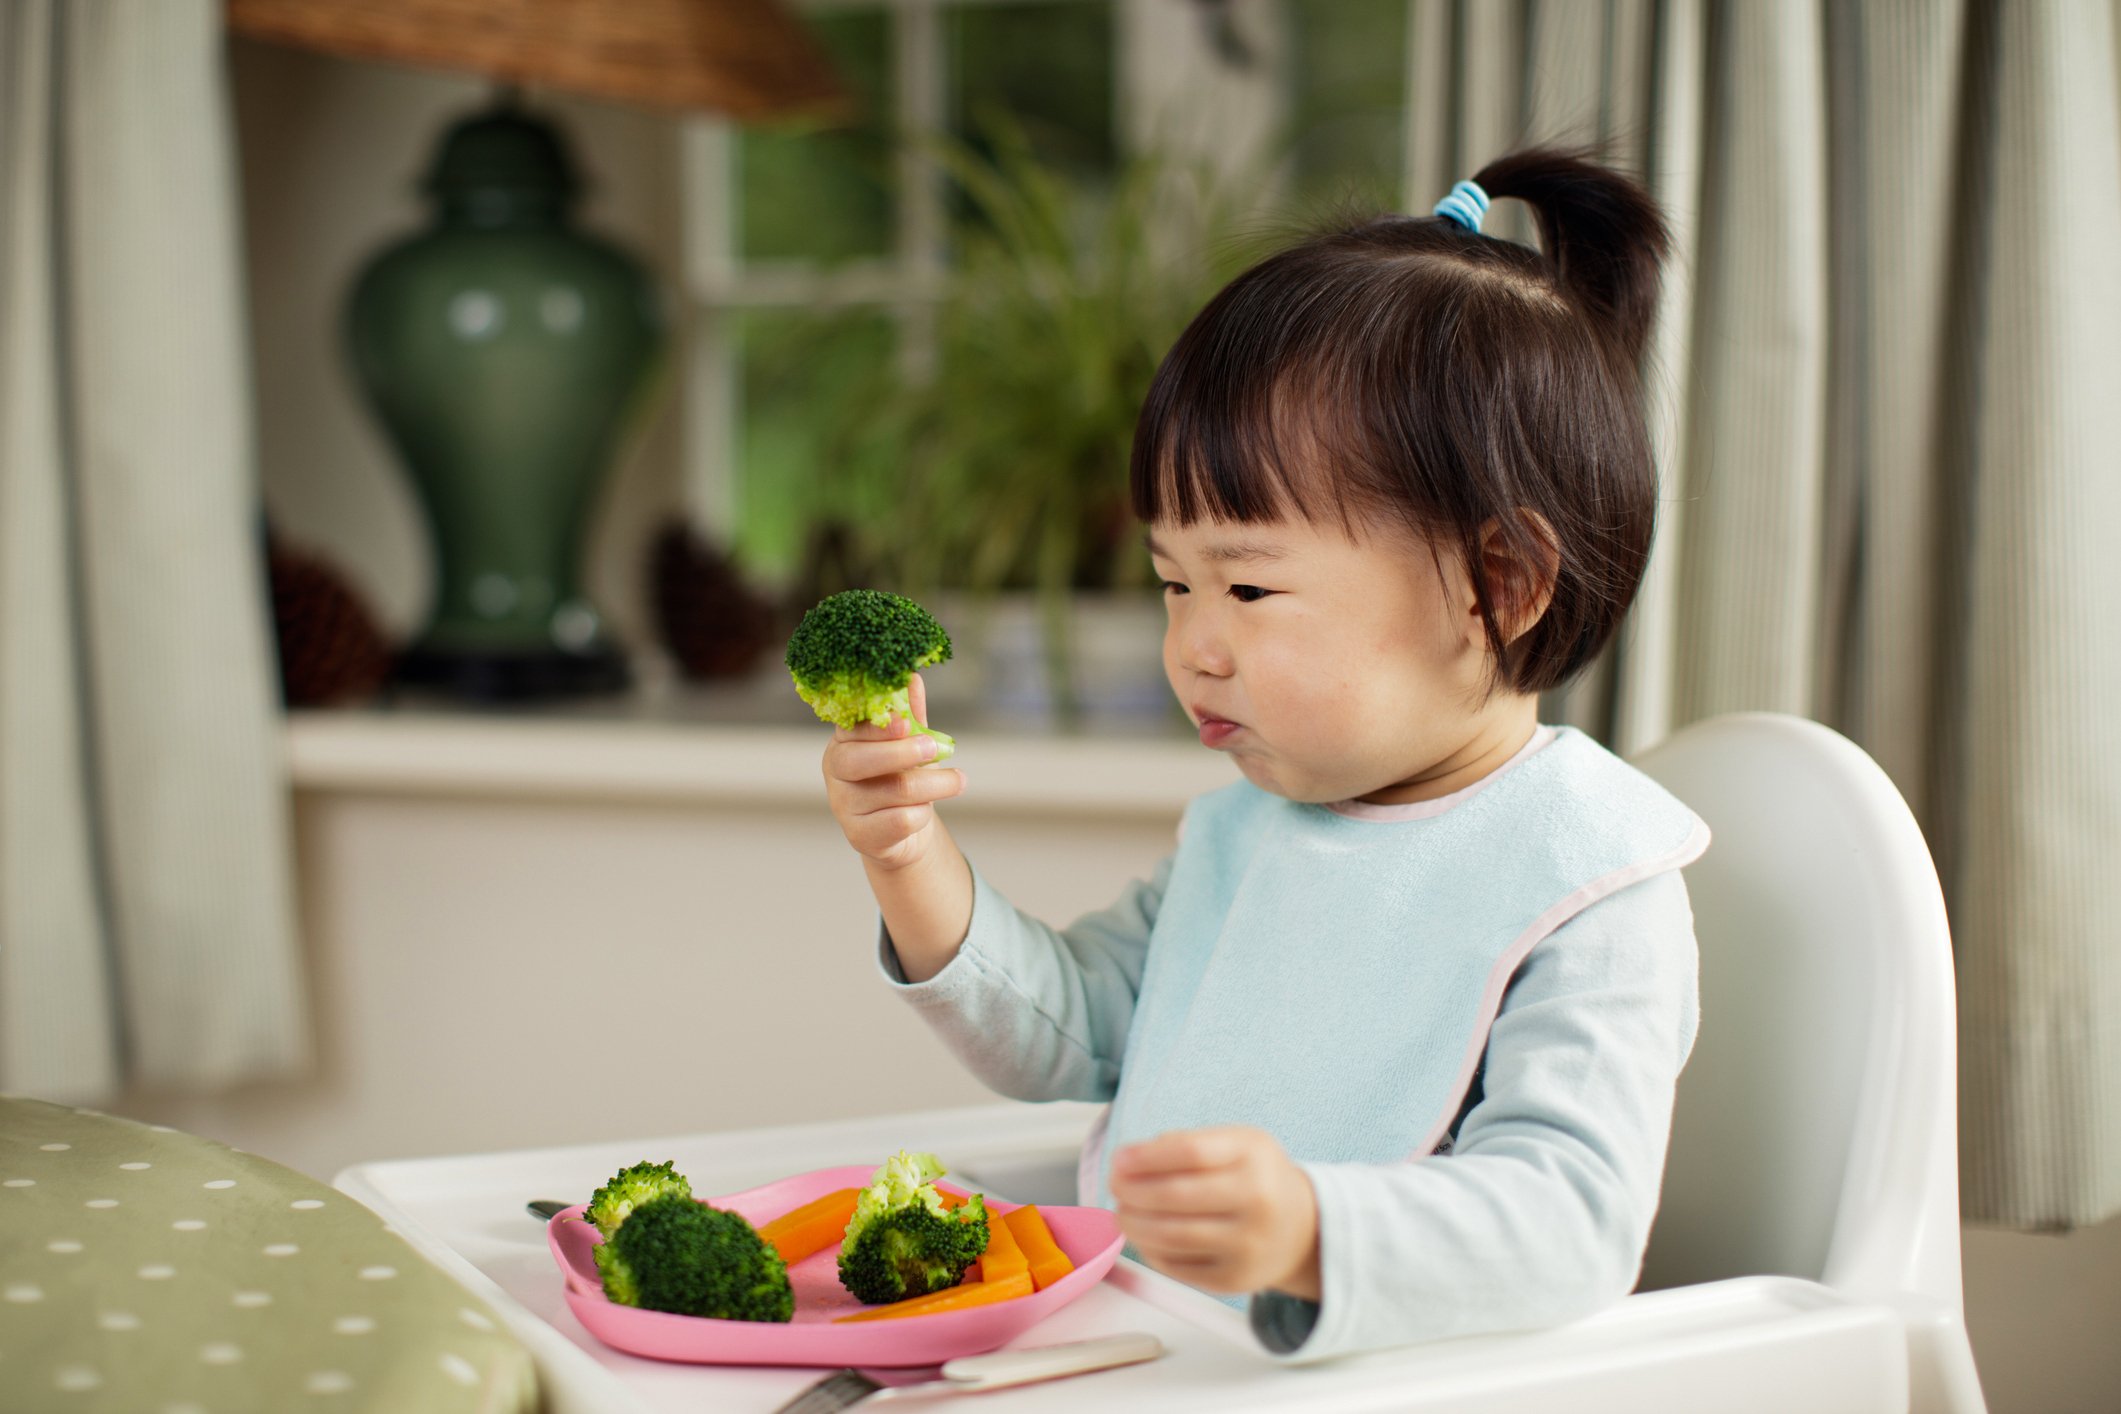 What Are the Best Vegetables and Recipes for Getting Kids to Eat Healthier?